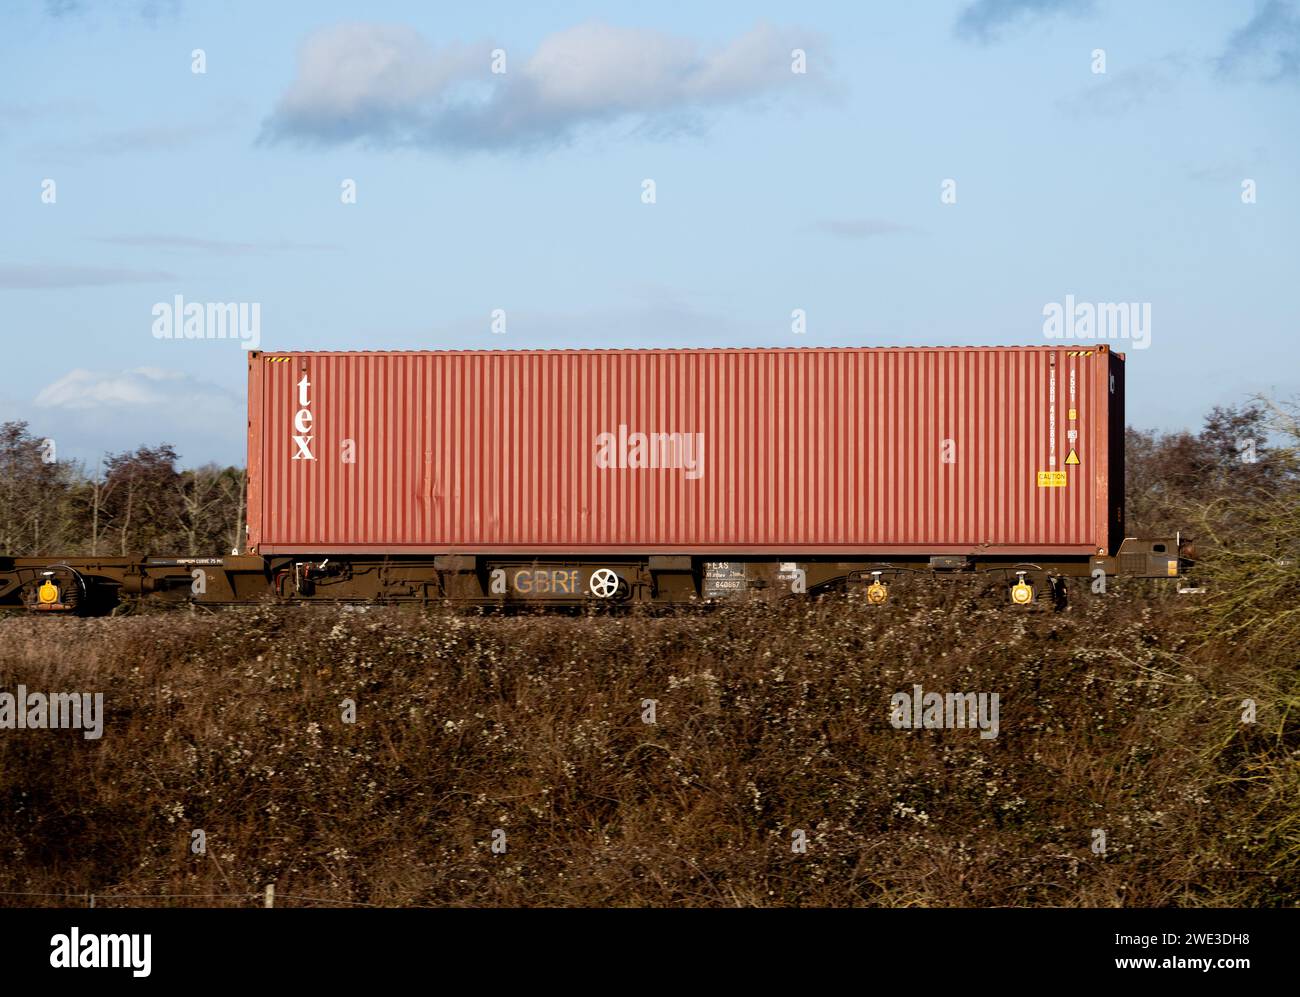 Tex container on a freightliner train, Warwickshire, UK Stock Photo